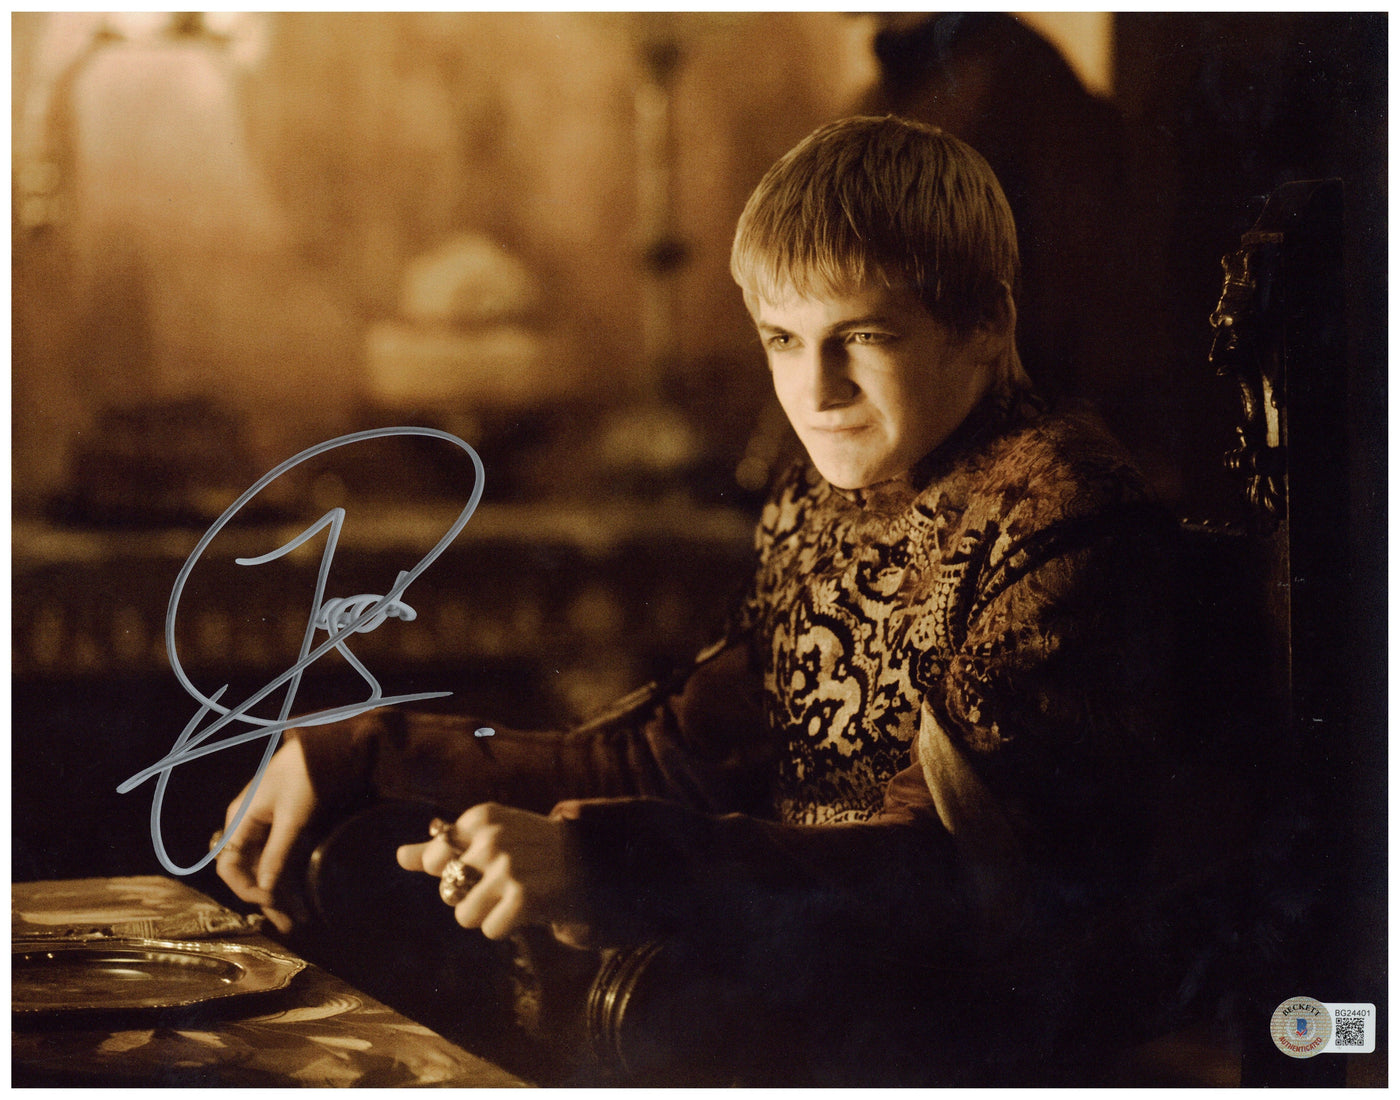 JACK GLEESON SIGNED 11X14 PHOTO GAME OF THRONES JOFFREY AUTOGRAPHED BAS #3